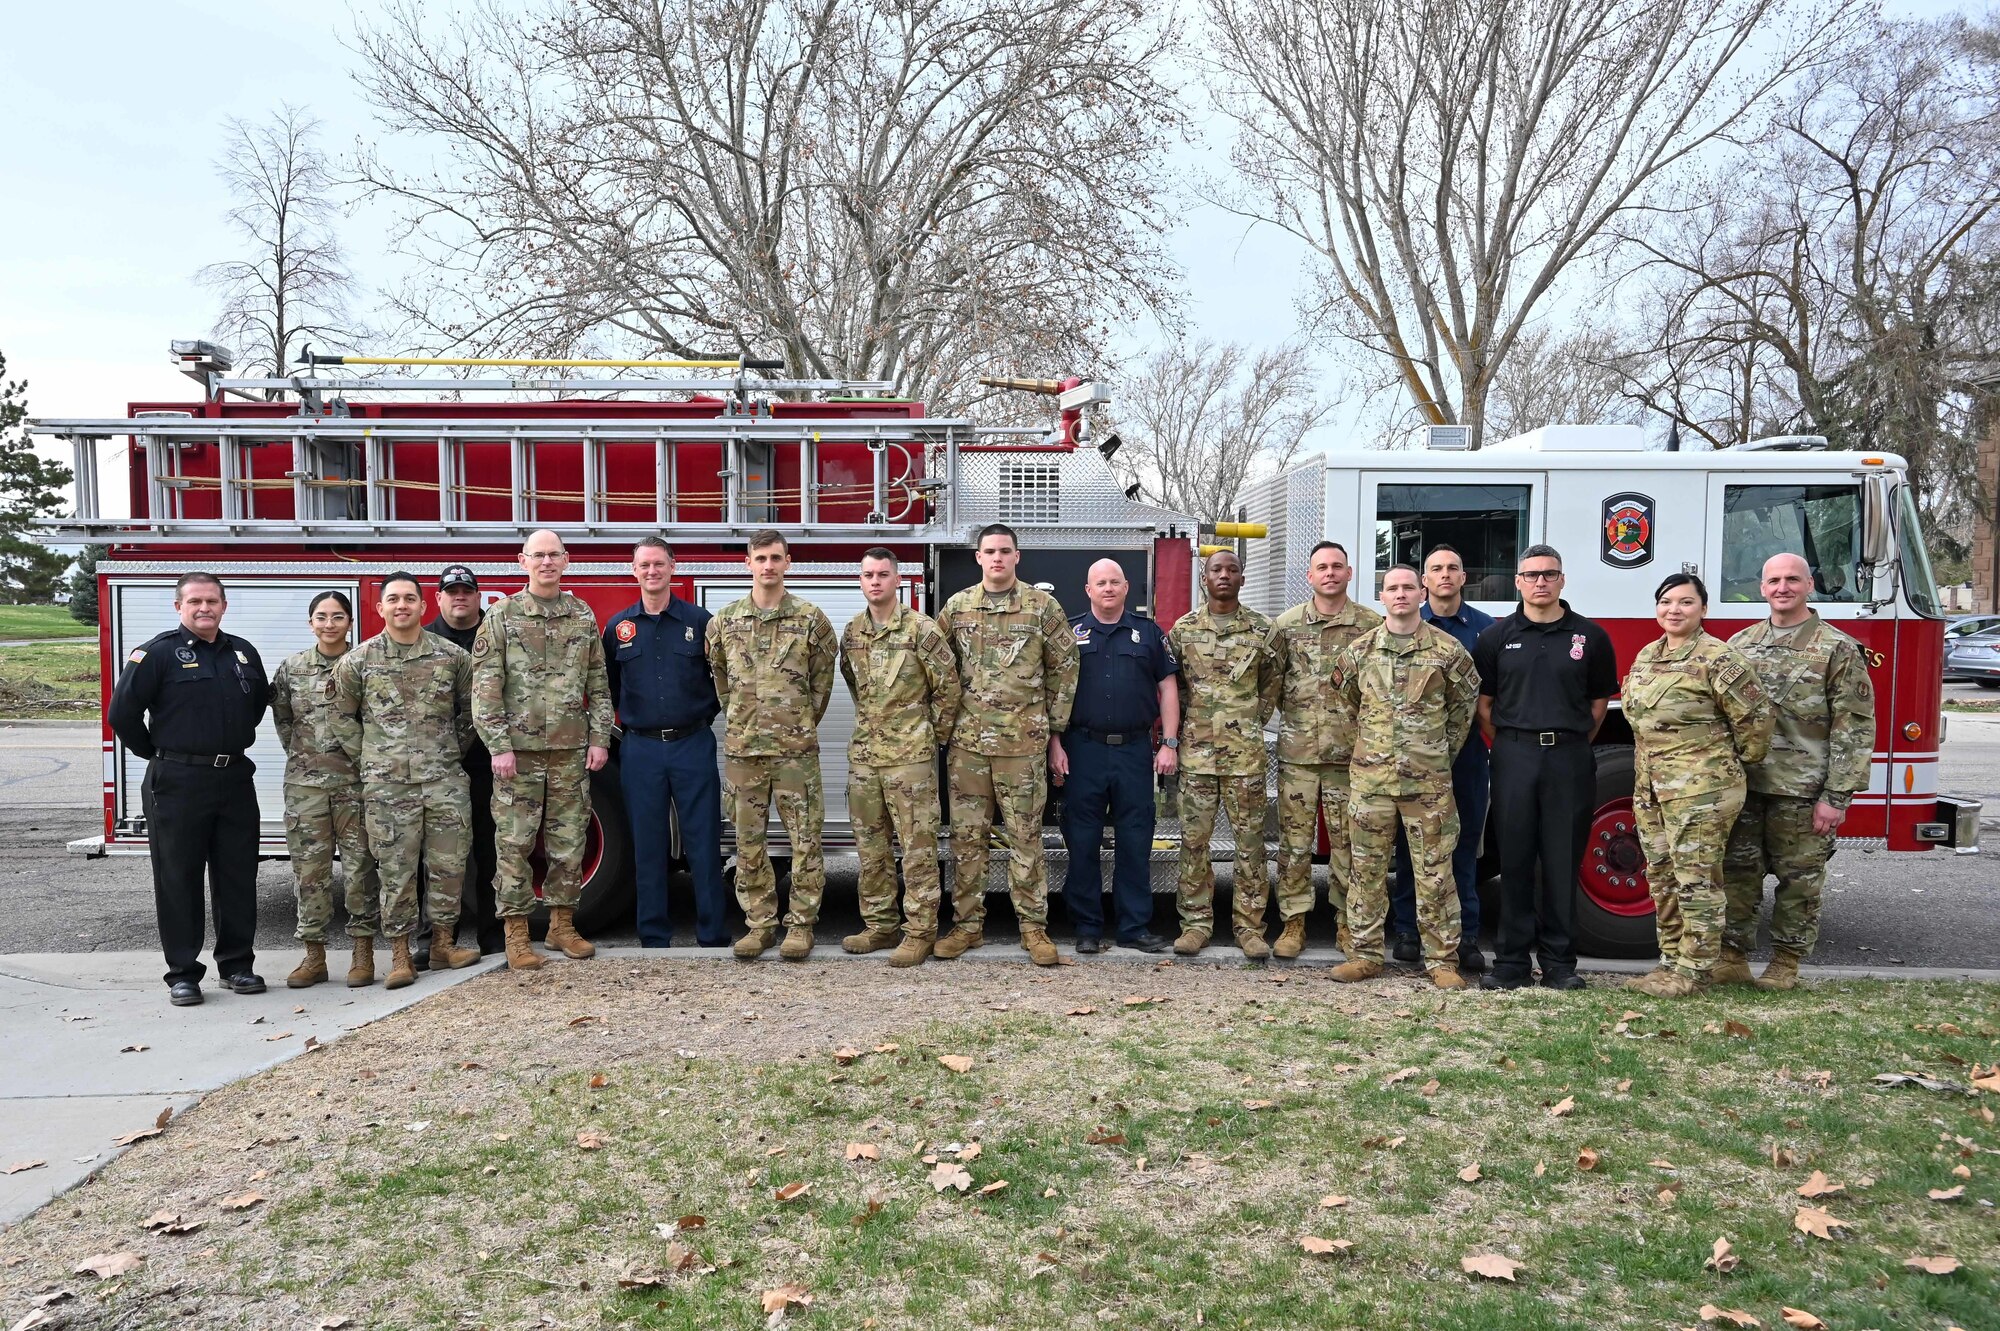 Gen. Duke Z. Richardson, Air Force Materiel Command commander, and Chief Master Sgt. David A. Flosi, AFMC command chief, gather with members of the 775th Civil Engineer Squadron Fire and Emergency Services in front of a fire truck